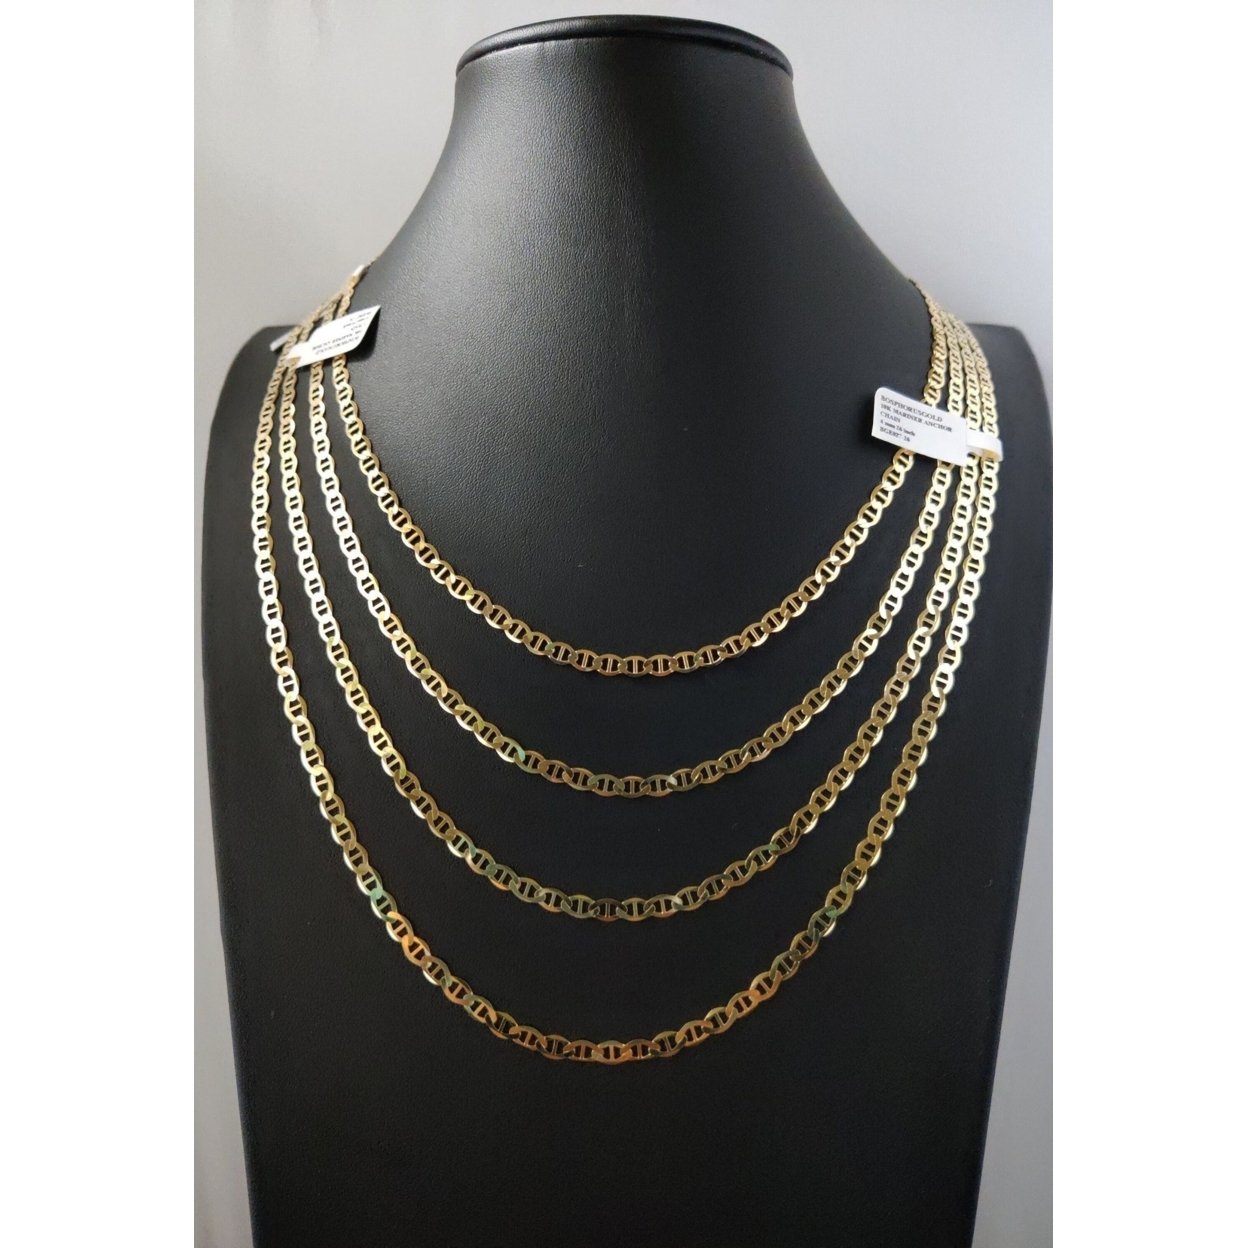 Yellow Gold Filled High Polish Finsh Chain Necklace,Mariner Chain Necklace,Necklace,Gold Necklace, Mariner Necklace, - 24''